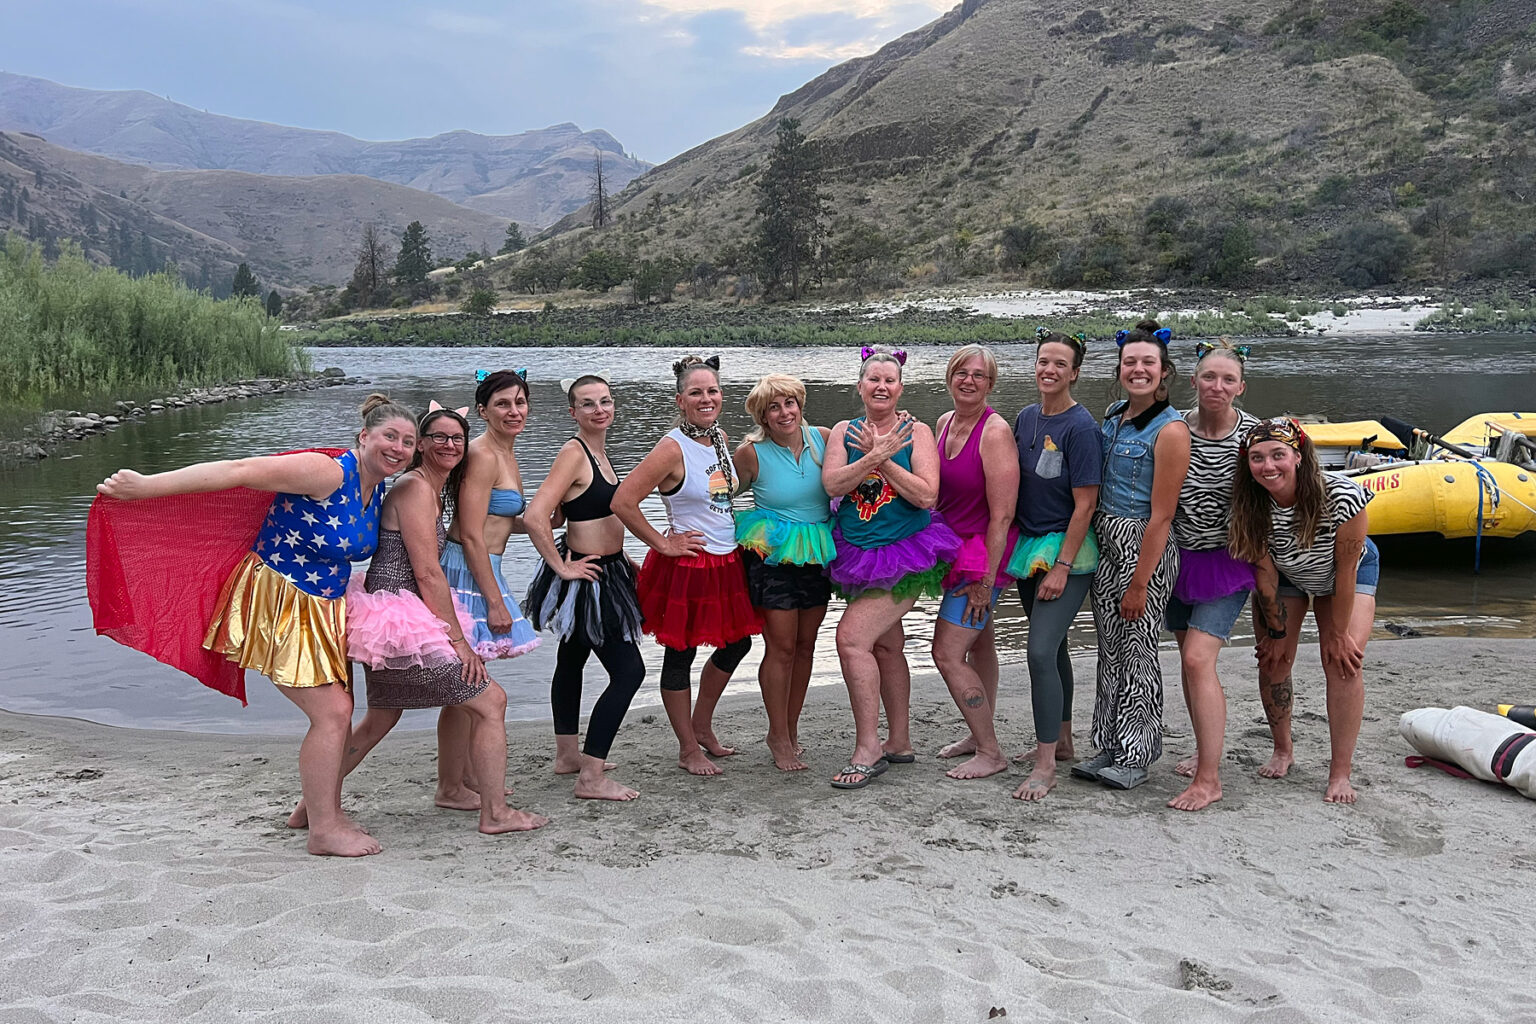 A group of smiling women in costumes lined up on a sandy beach on an OARS Gorges of the Lower Salmon River Women's Wellness trip.